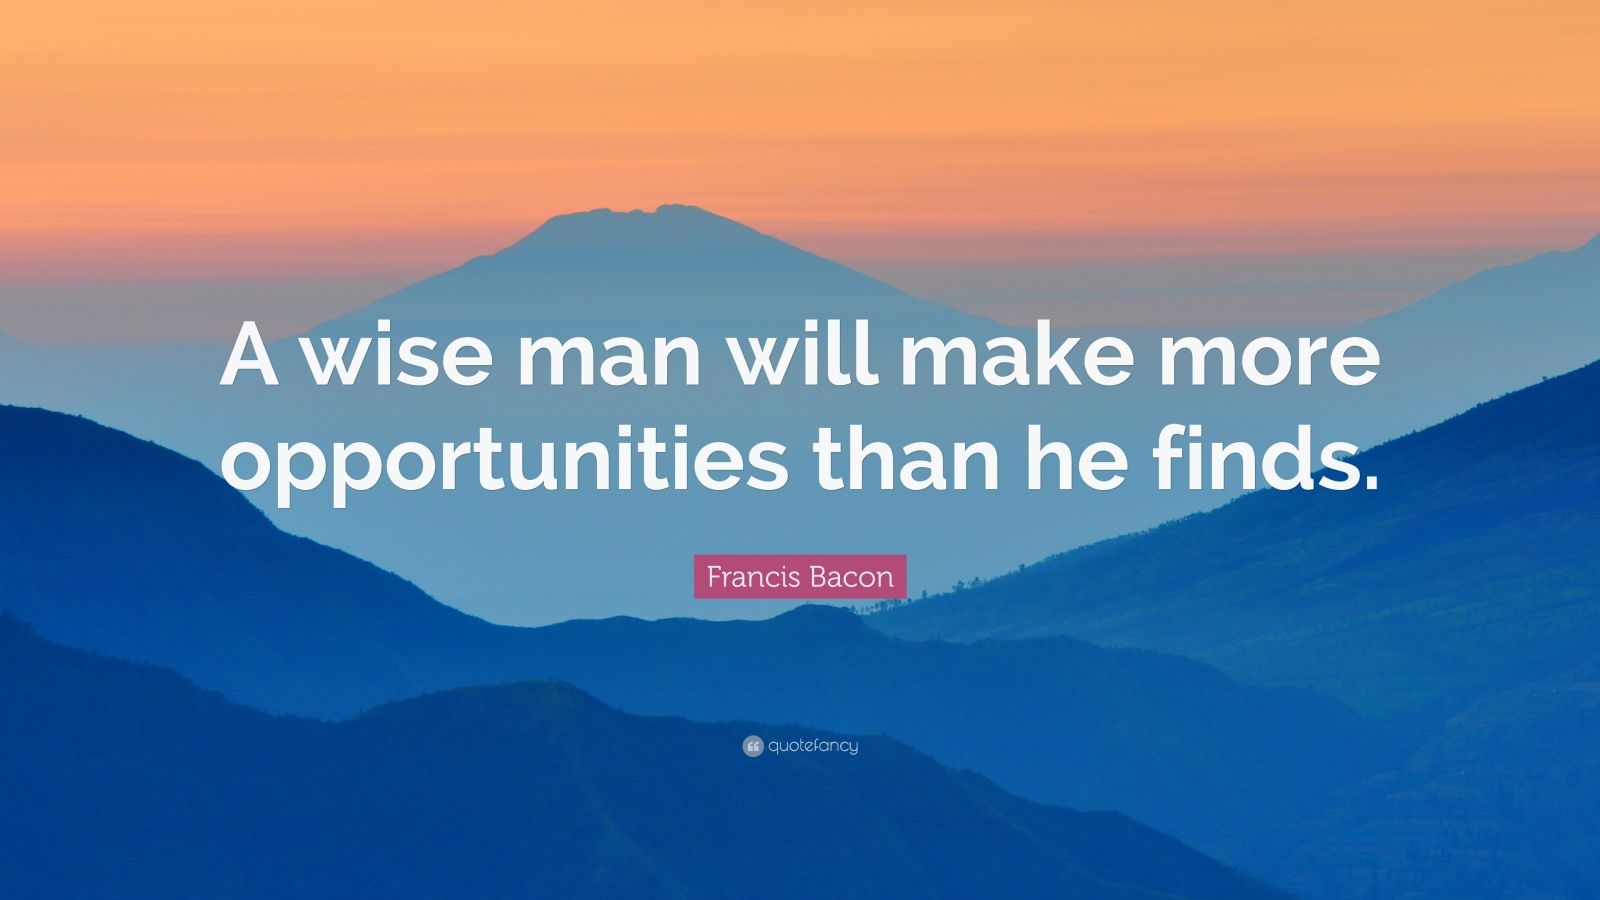 "a wise man will make more opportunities than he finds.